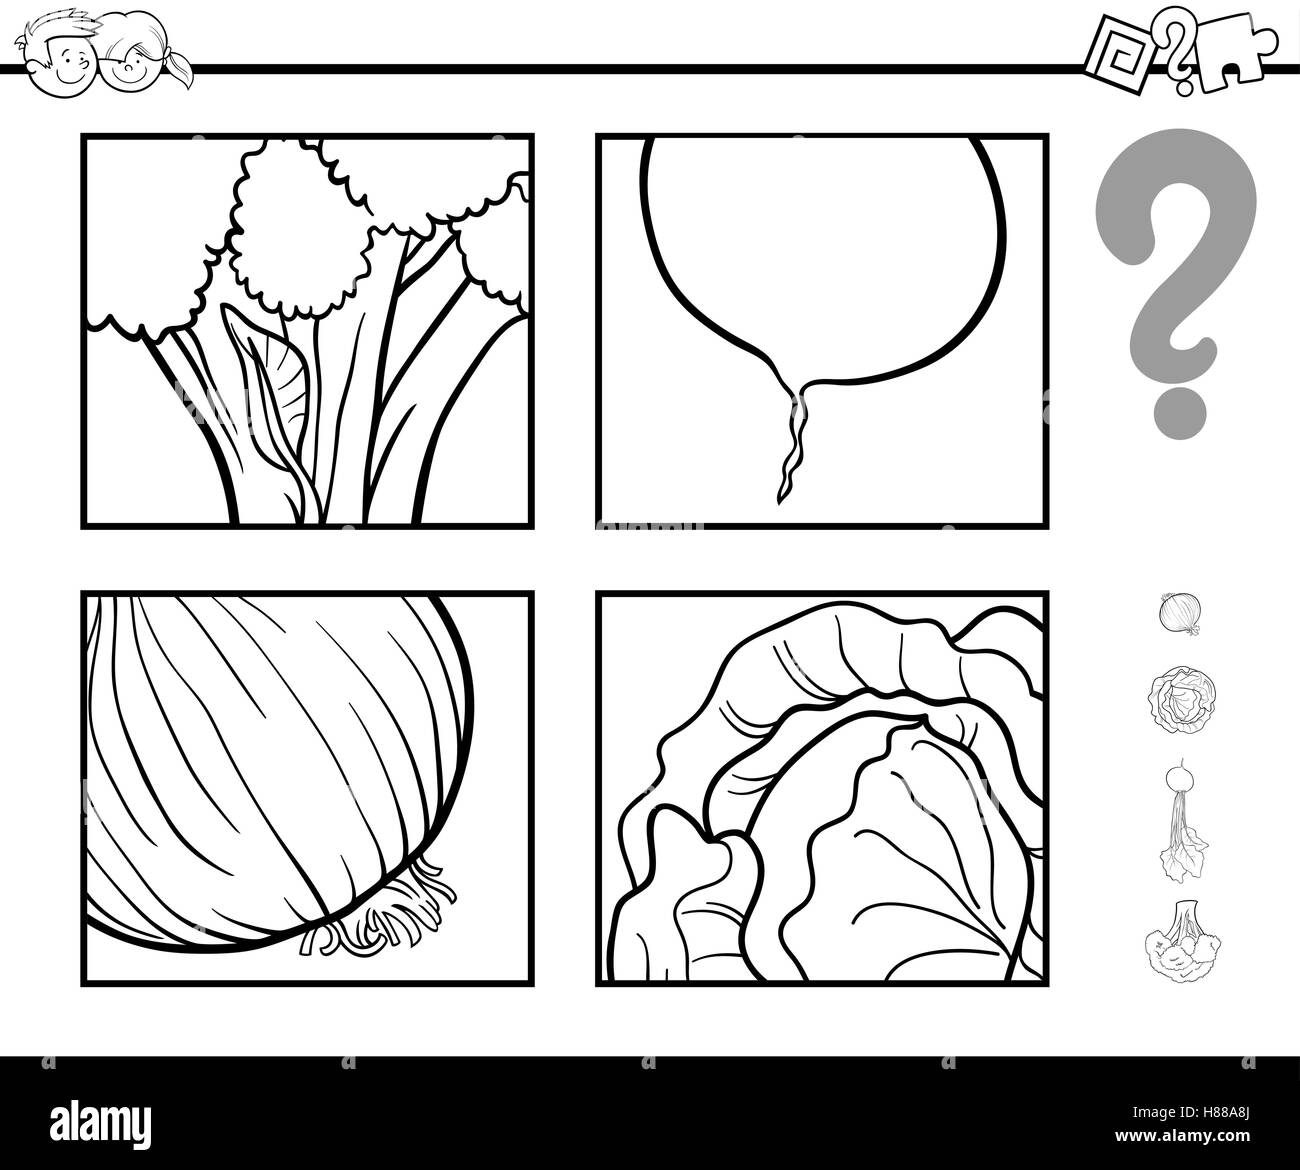 Black and White Cartoon Illustration of Educational Activity Task of Guessing Vegetables for Children Coloring Page Stock Vector